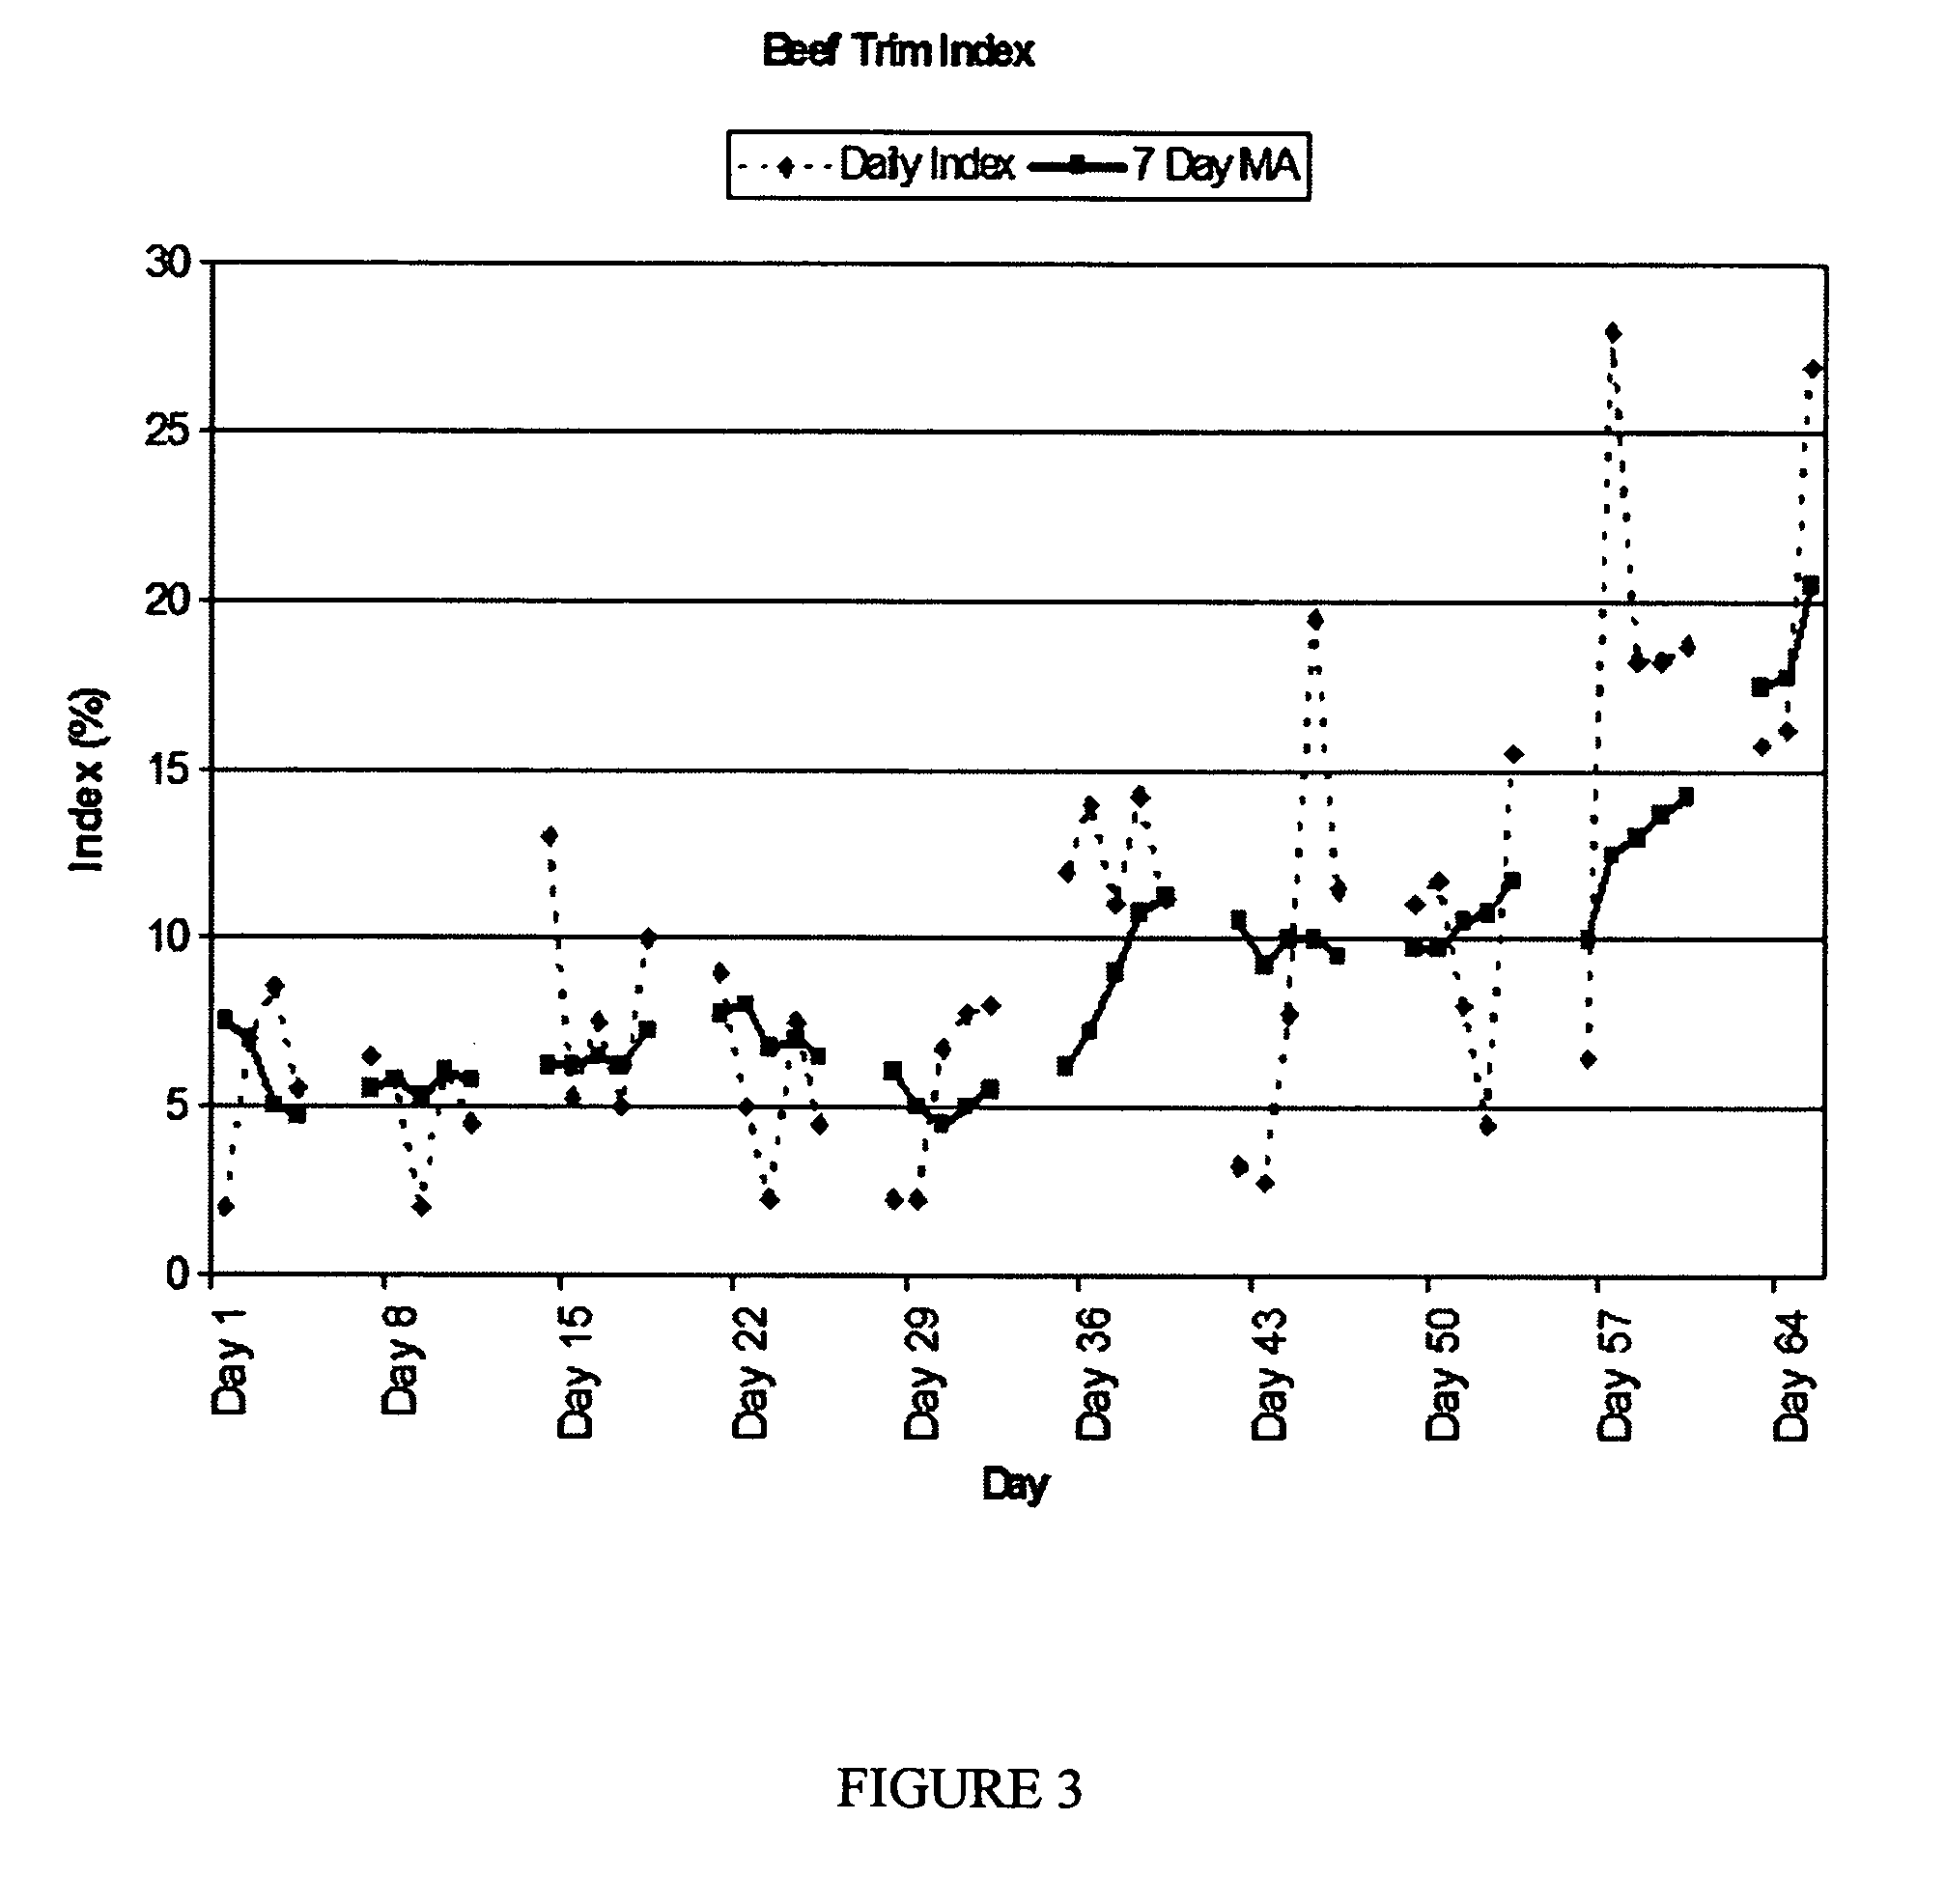 Trend analysis and statistical process control using multitargeted screening assays